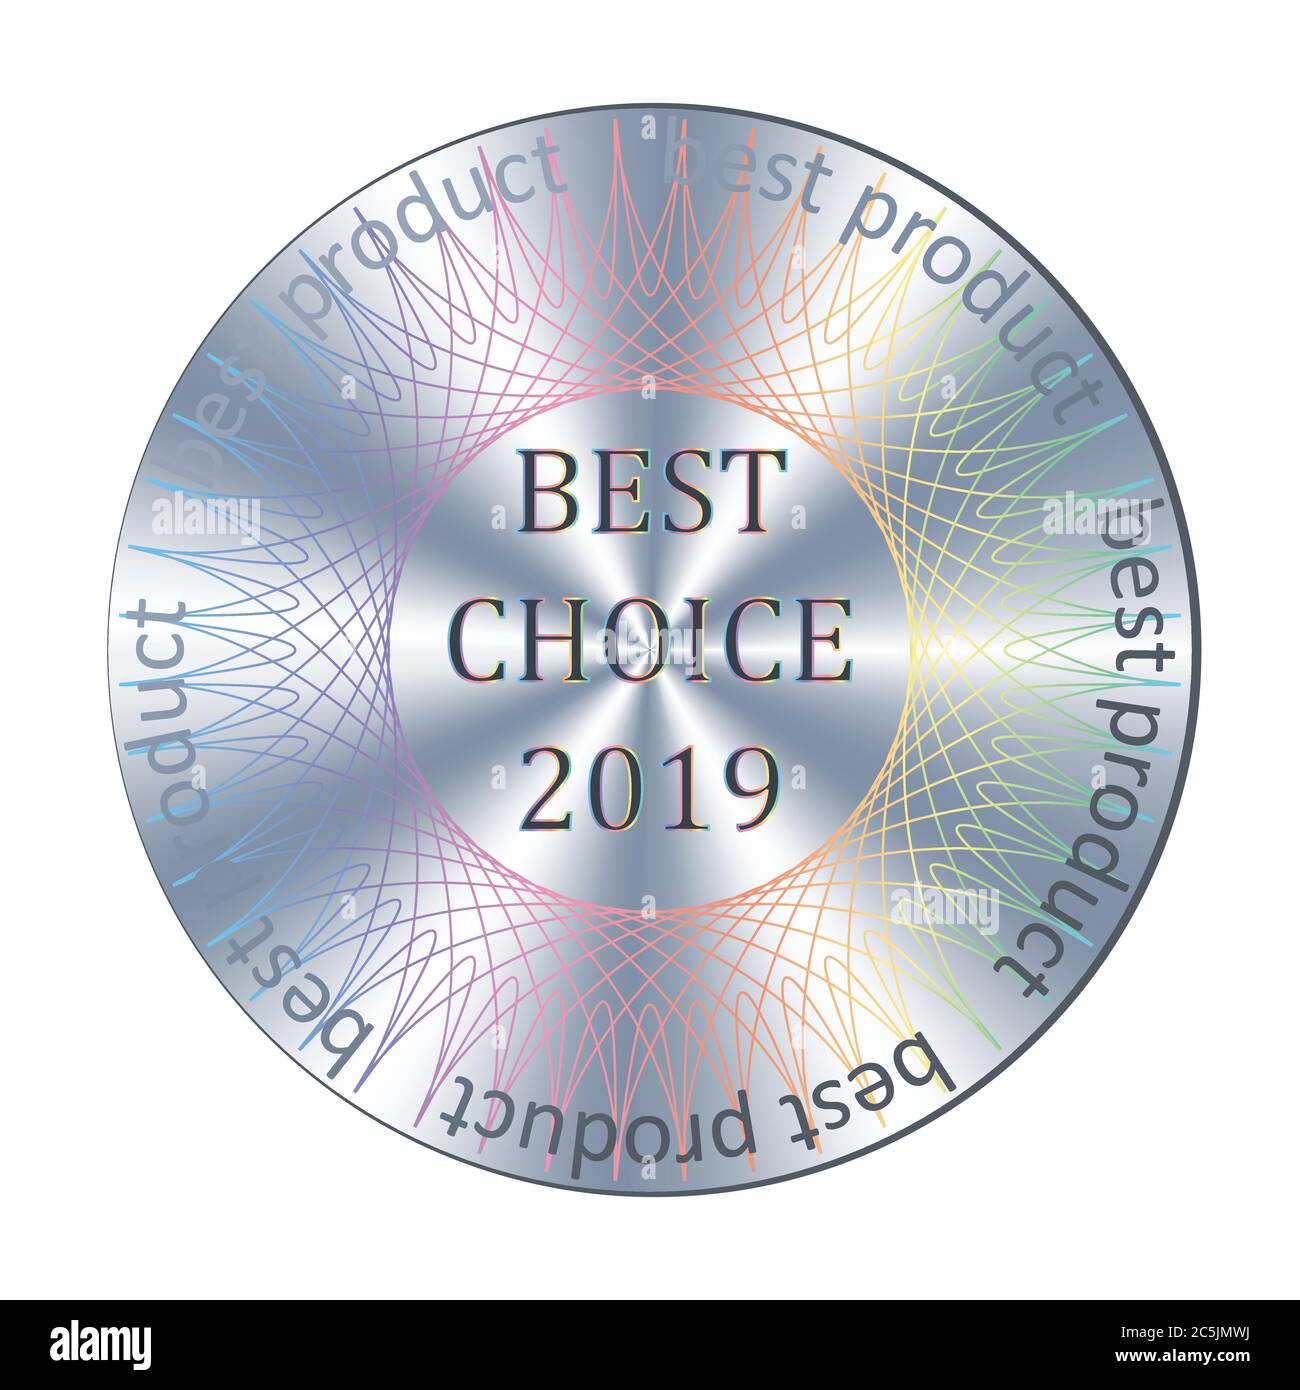 Best choice round hologram realistic sticker. Vector element for product quality guarantee Stock Vector